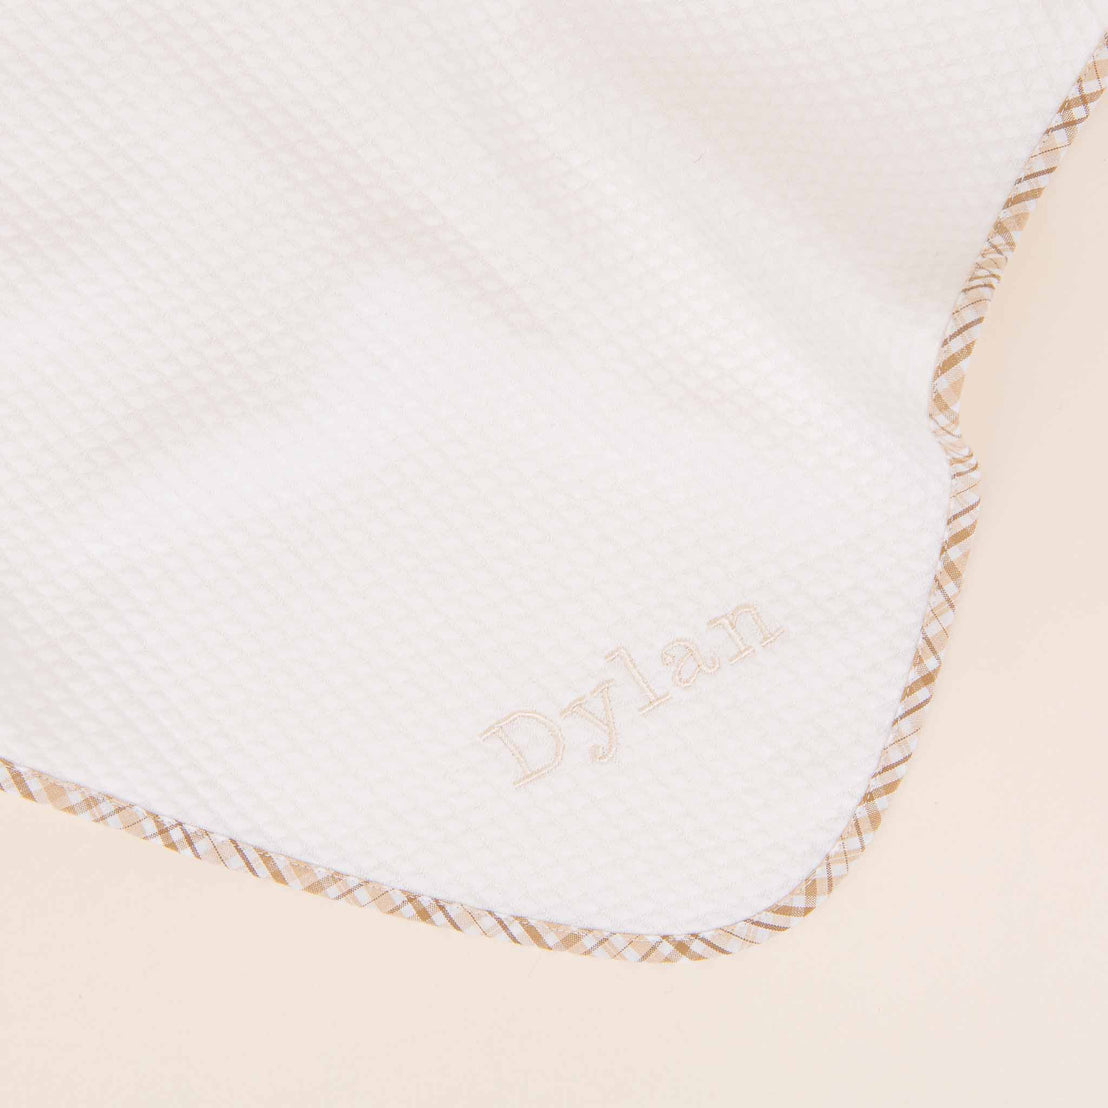 A close-up of a white baby blanket embroidered in a light tan thread. The blanket has a textured diamond pattern and a tan stitched border, perfect for a newborn's coming home.